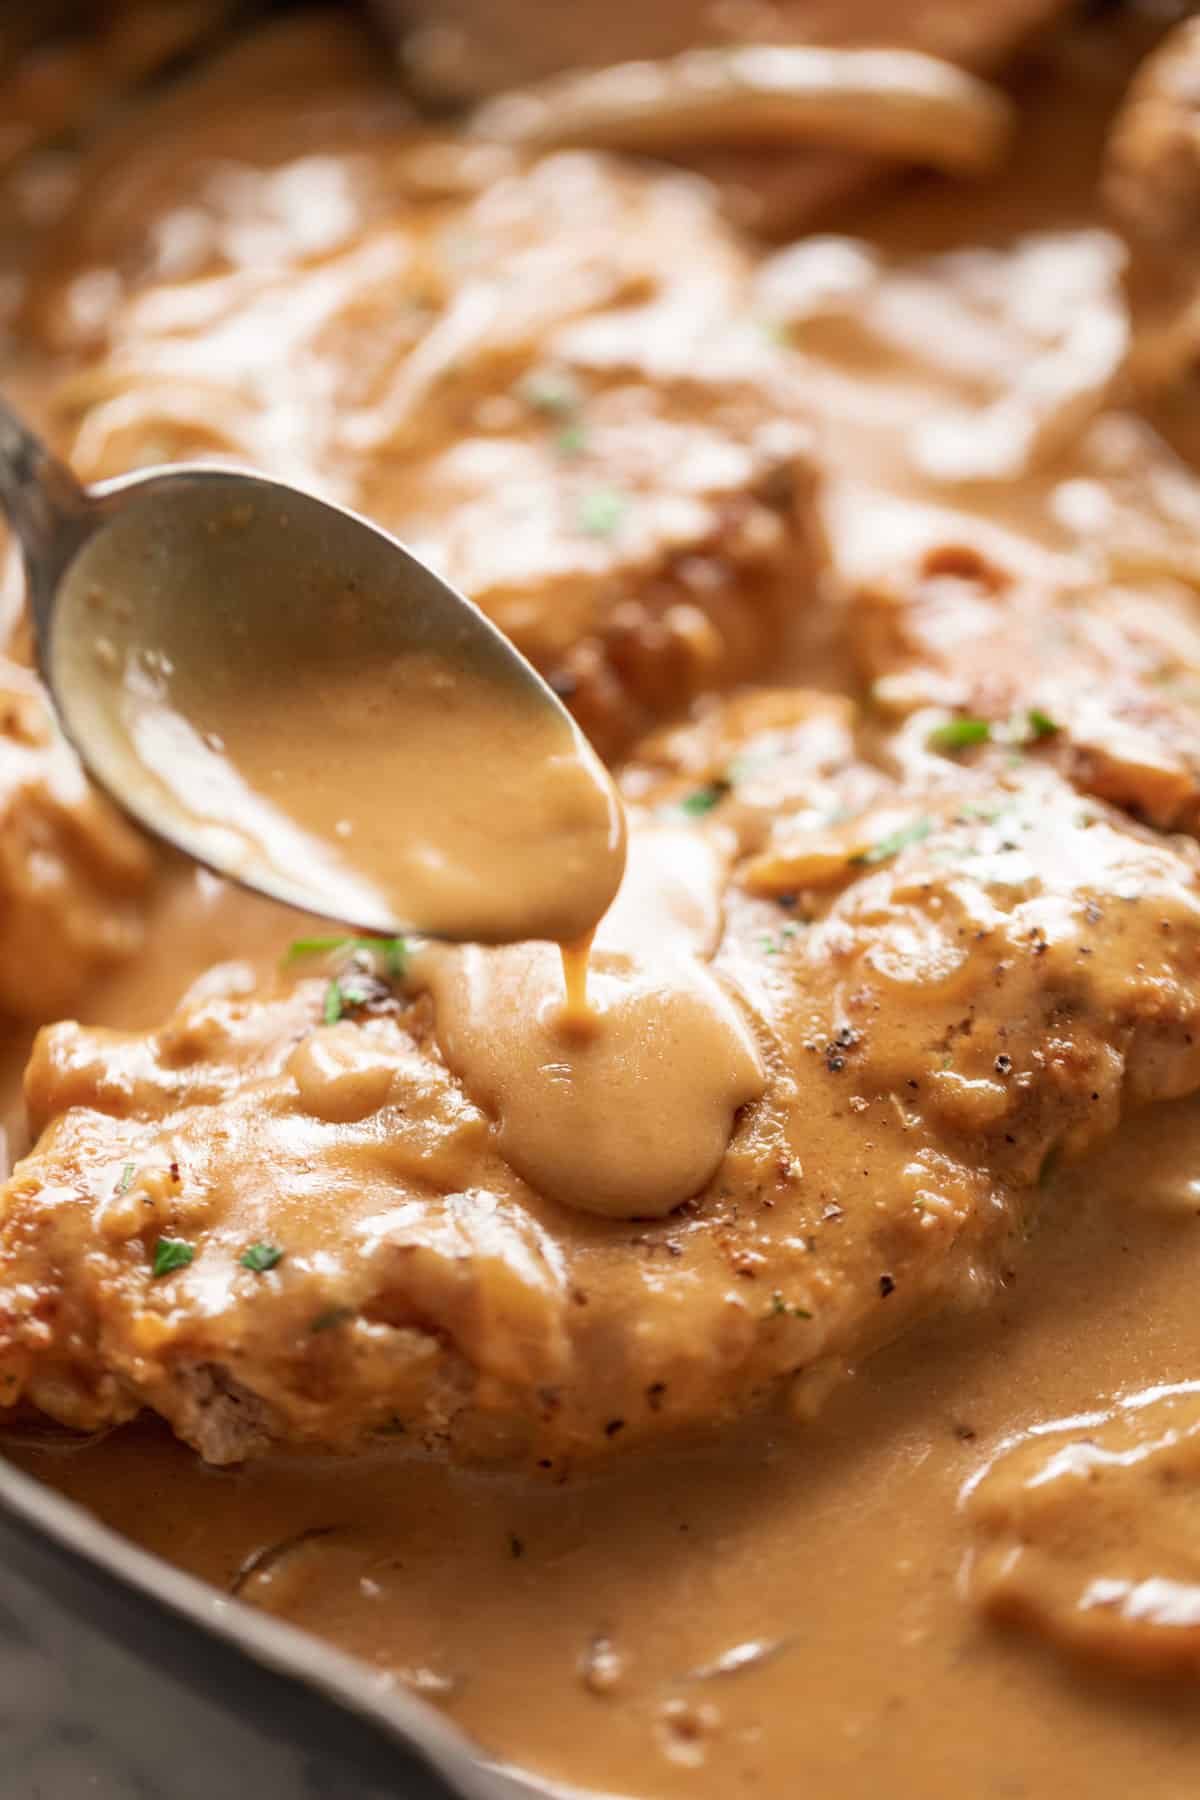 Smothered Pork Chops cooked in a rich onion gravy. Pouring gravy over one pork chop before serving. | cafedelites.com